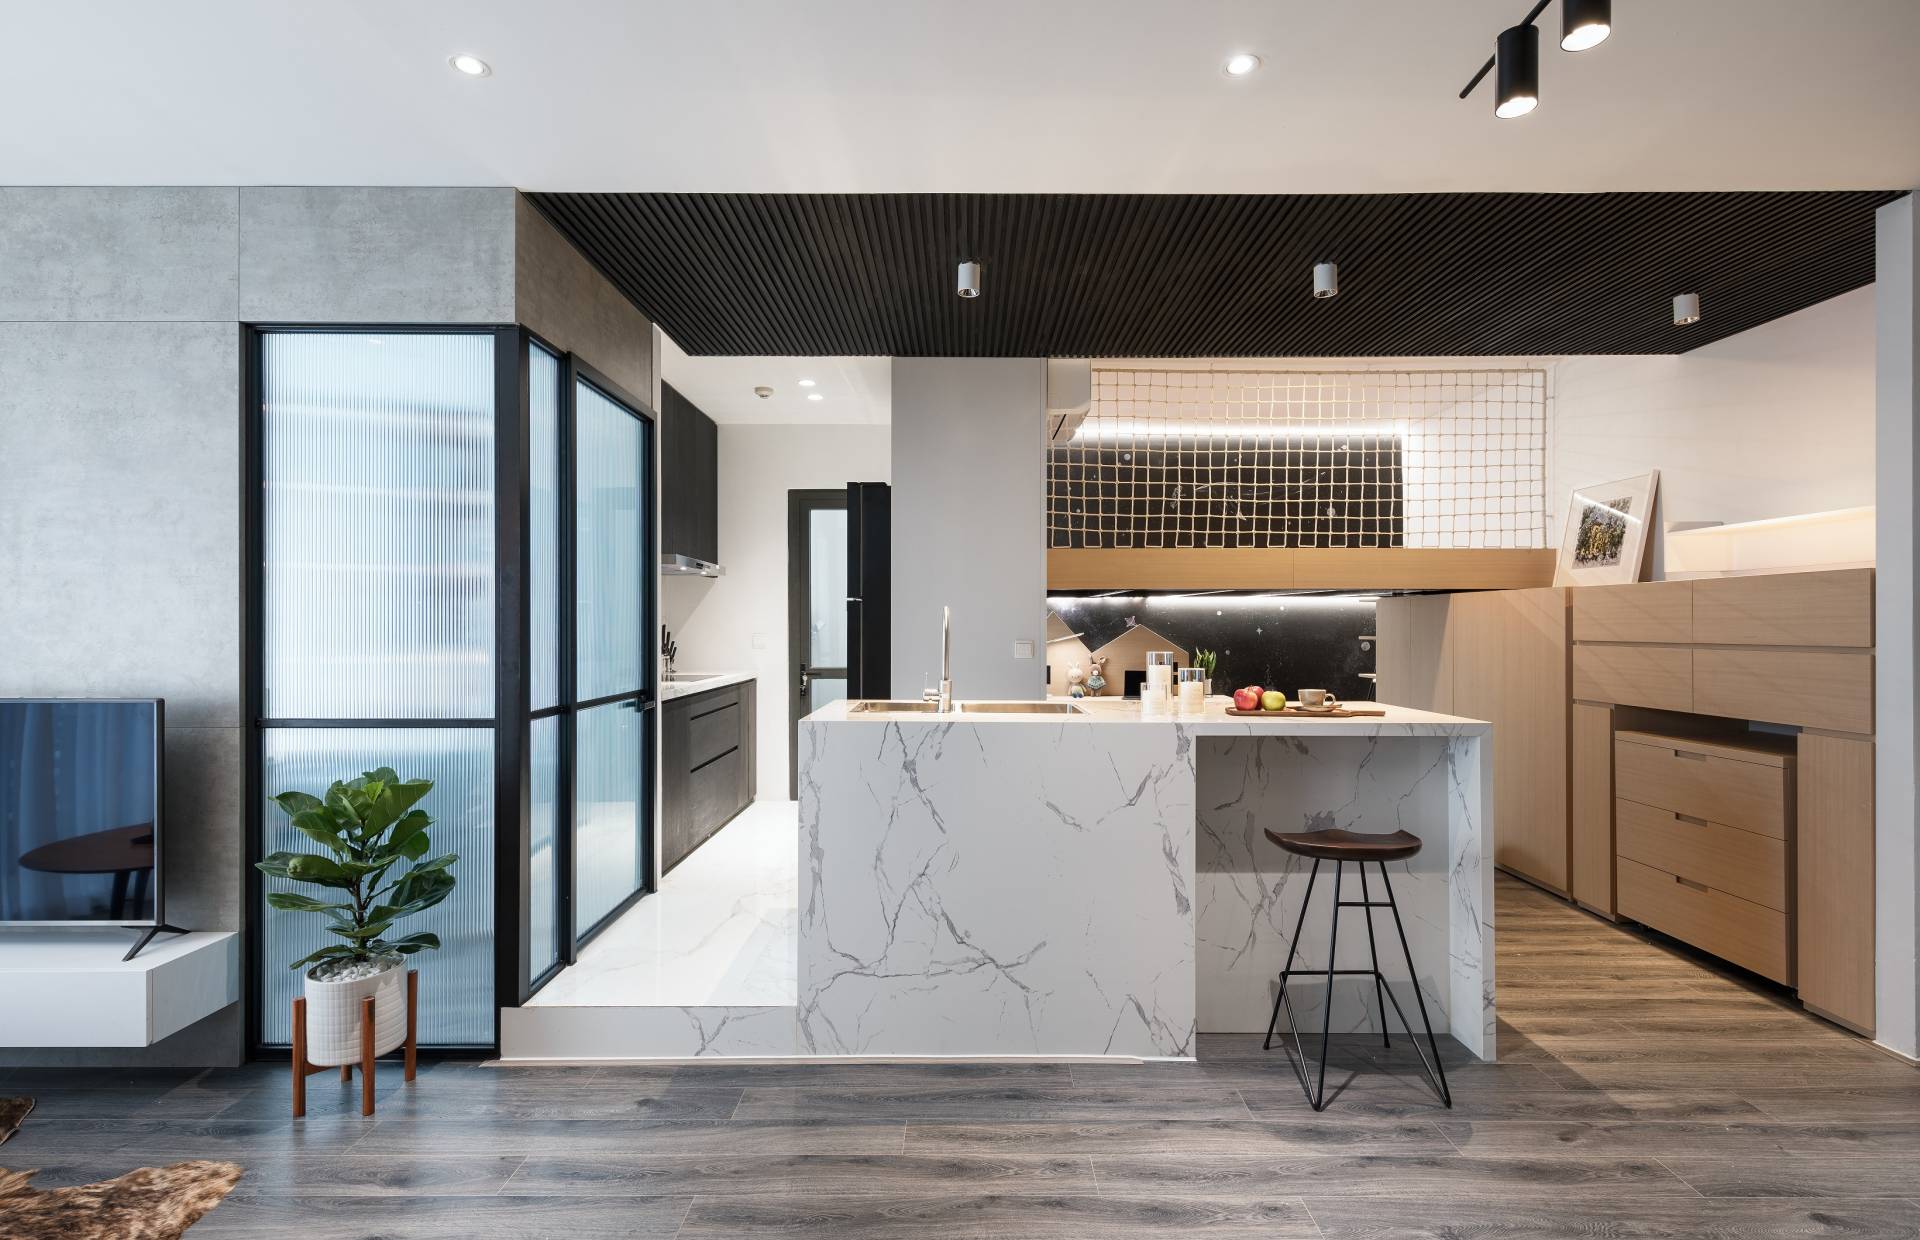 The kitchen is separate, its floor is raised up and the stone material is used in sync with the bar, both helping to divide and create a connection between spaces.